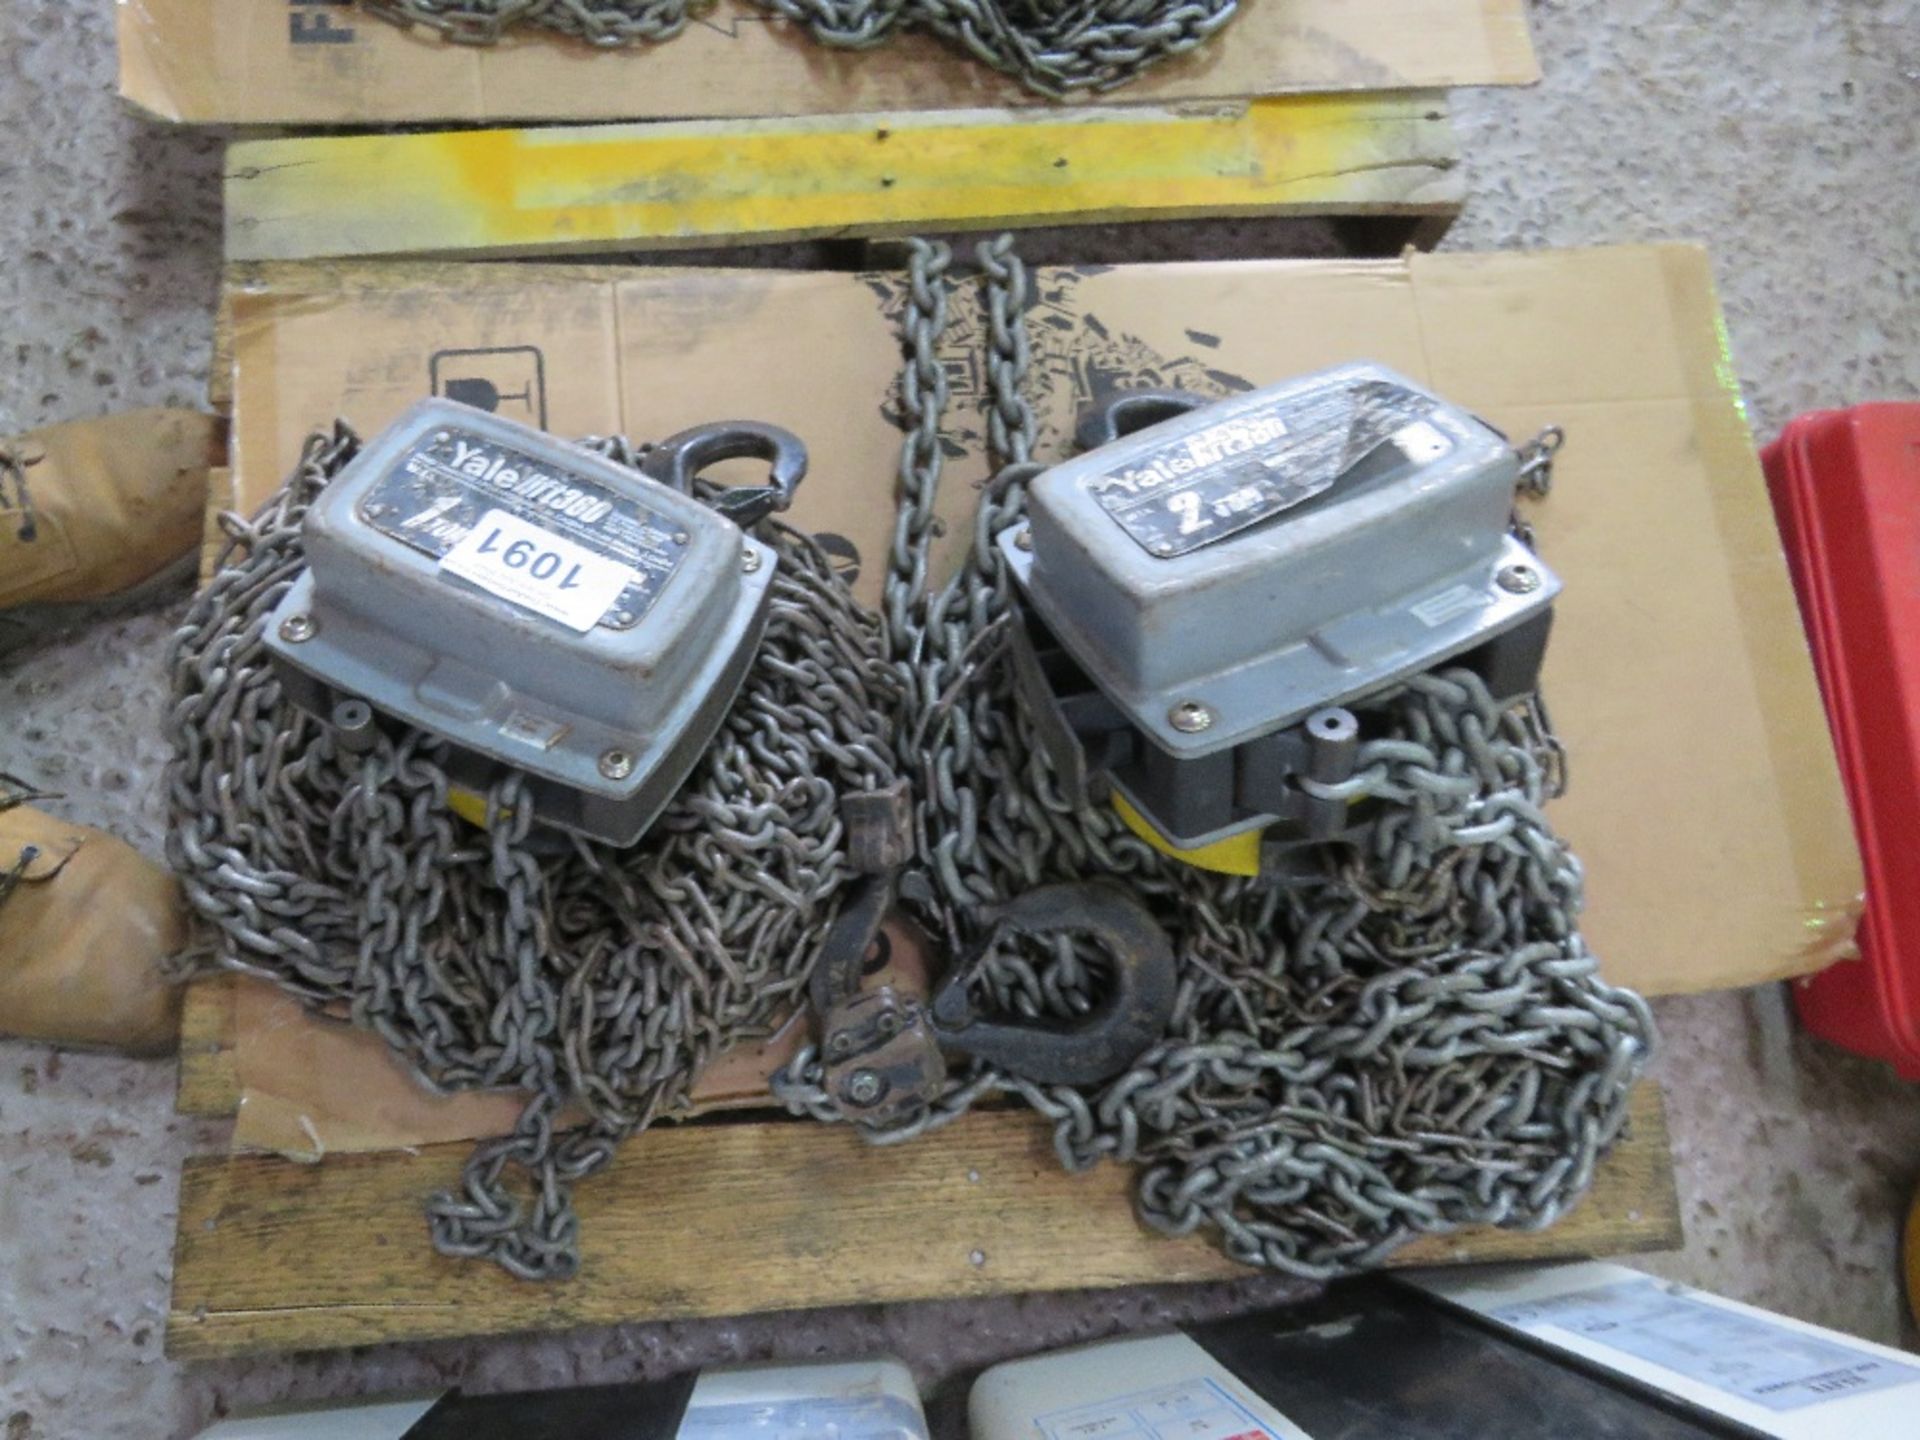 2 X YALE CHAIN HOISTS: 1TONNE AND 2 TONNE RATED. - Image 2 of 3